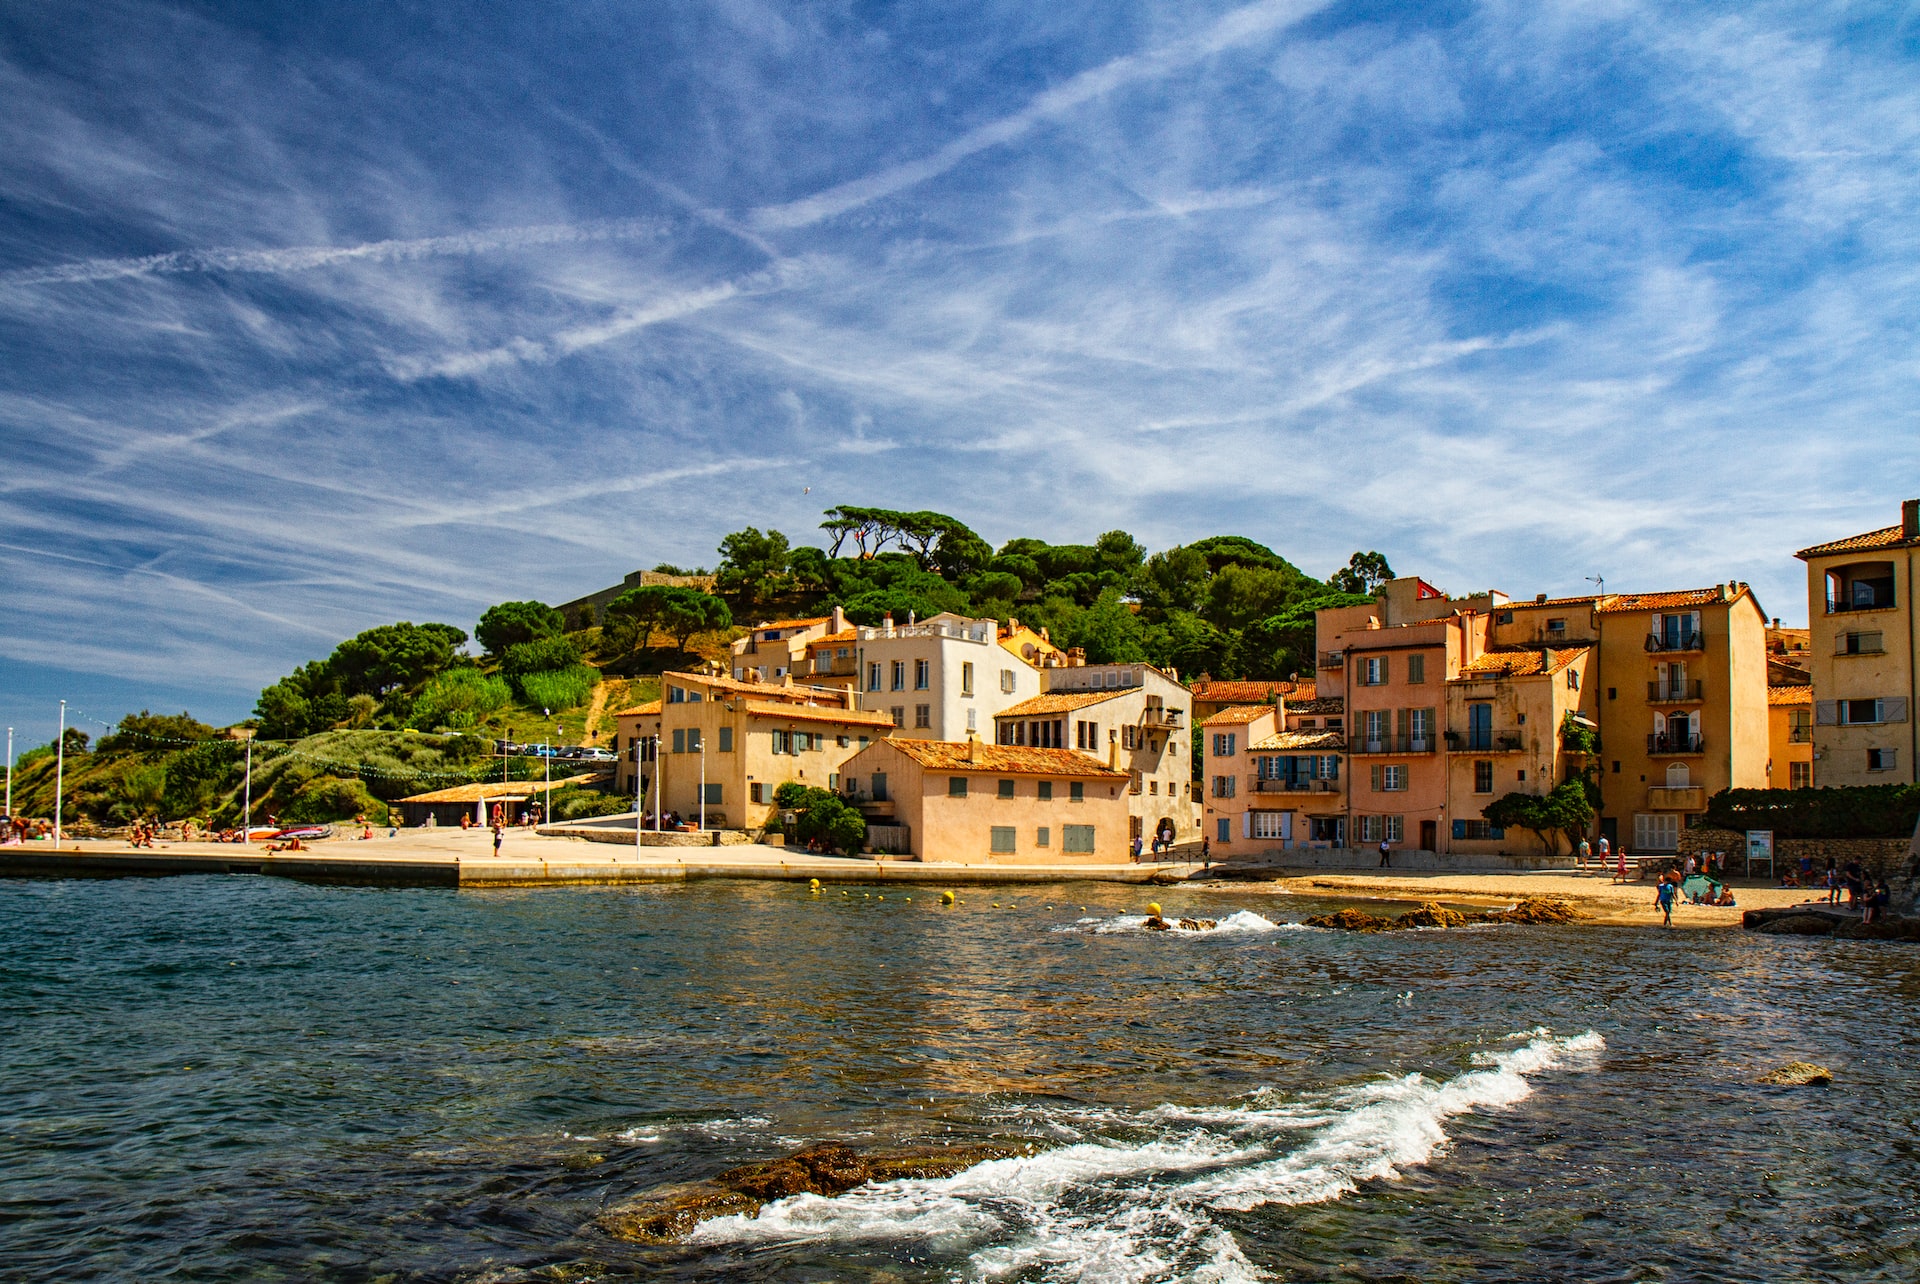 The sunny Saint Tropez in South of France
